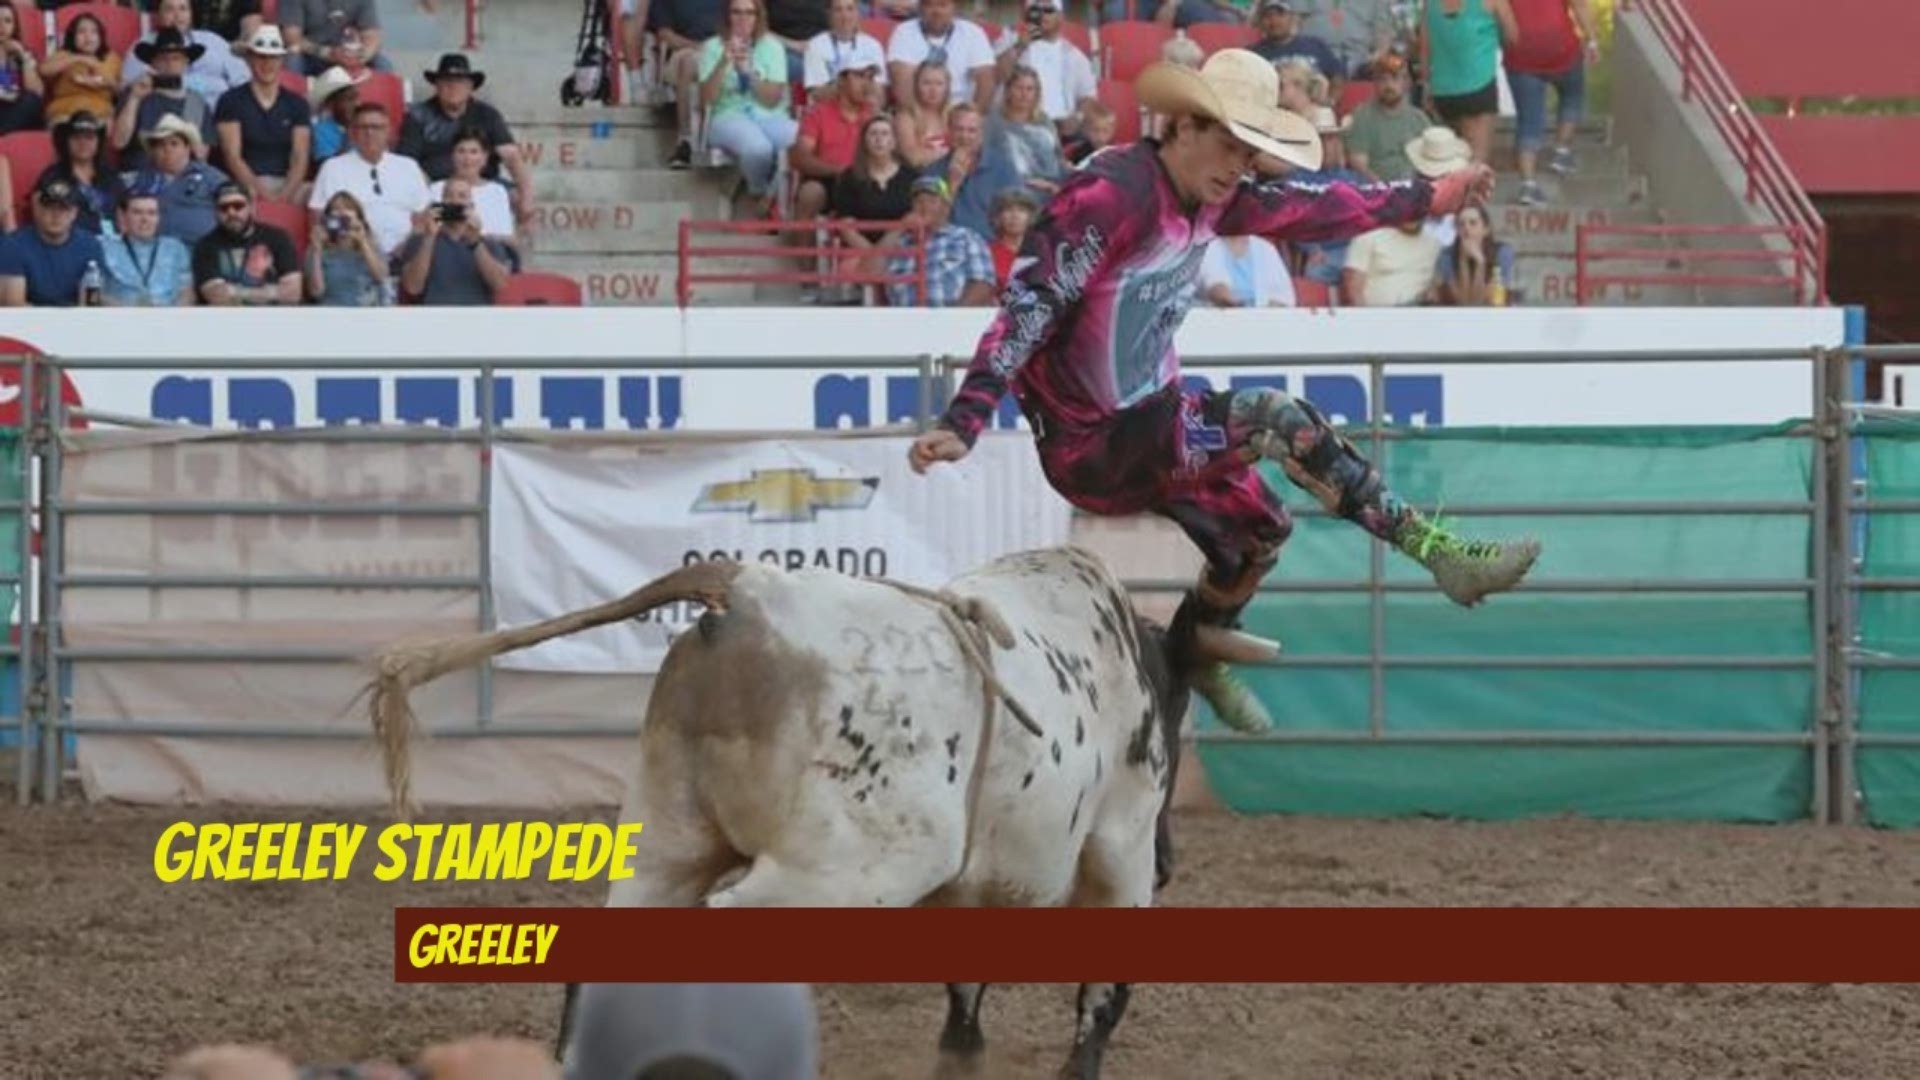 The final weekend of June 2019 offers early opportunities to celebrate Independence Day at several summer art and music festivals. The 98th annual Greeley Stampede is underway while the best racers in the country are prepared to take on Pikes Peak this weekend. No matter where you live in the Centennial State, there's a fun adventure waiting for you this weekend.